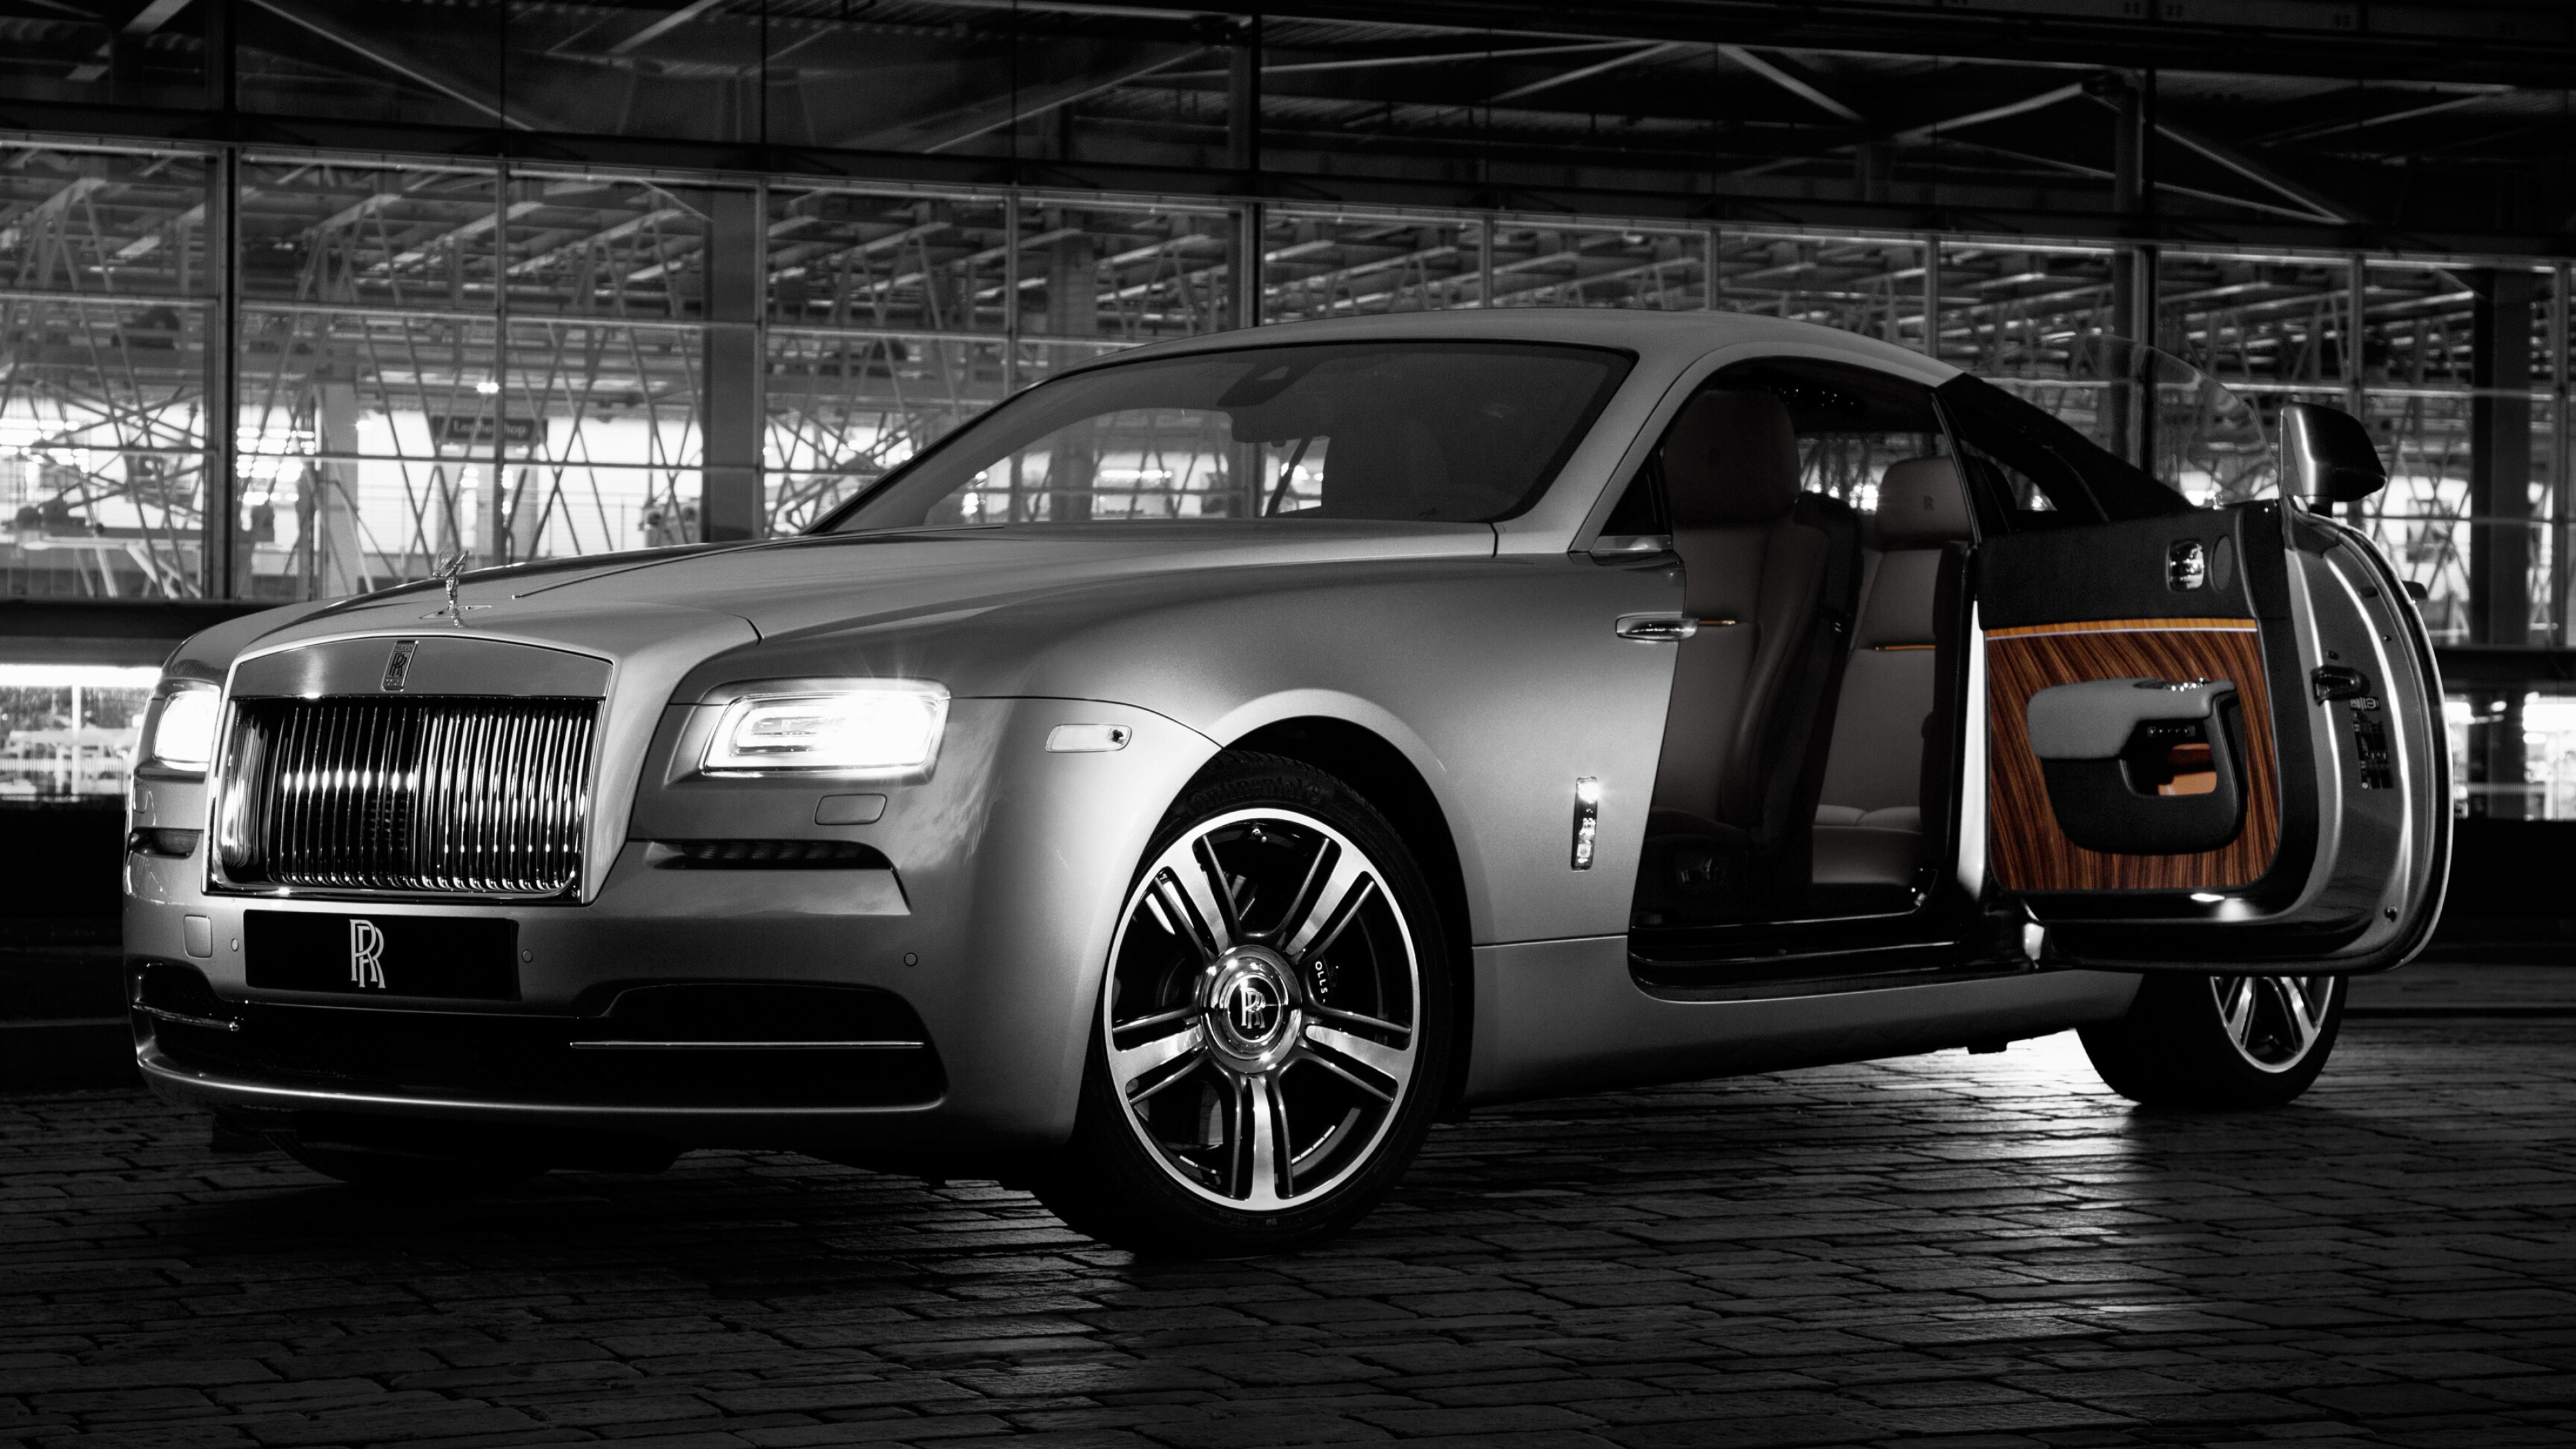 Rolls-Royce: Model Wraith, Based on the chassis of the model Ghost, Cars. 3840x2160 4K Background.